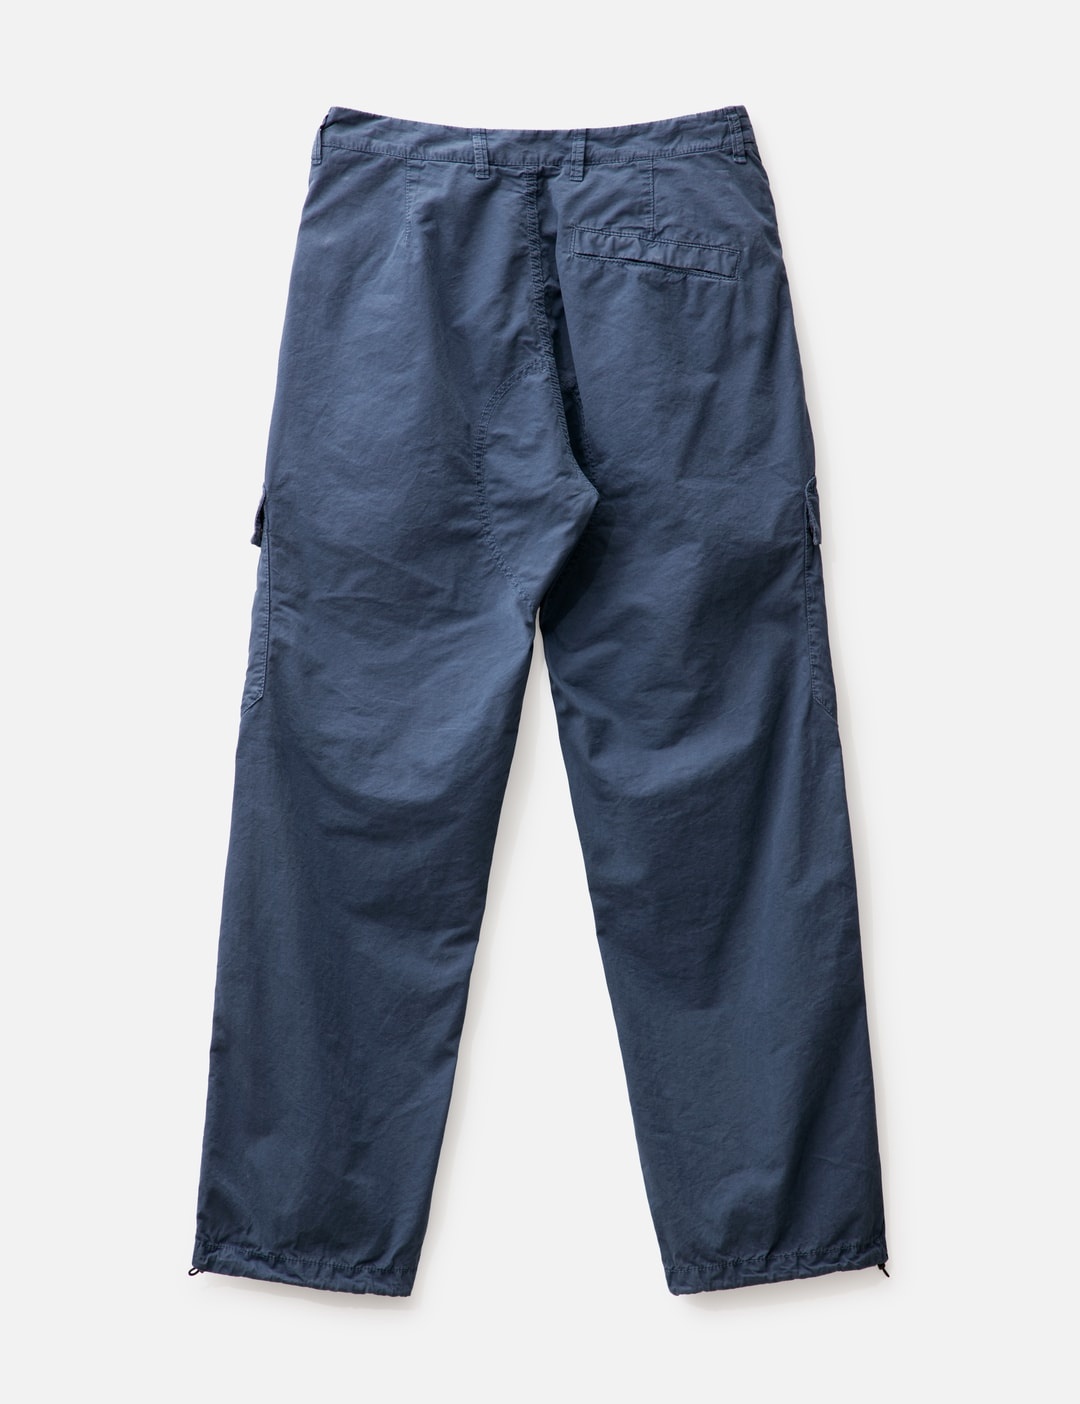 'OLD' TREATMENT CARGO PANTS - 2